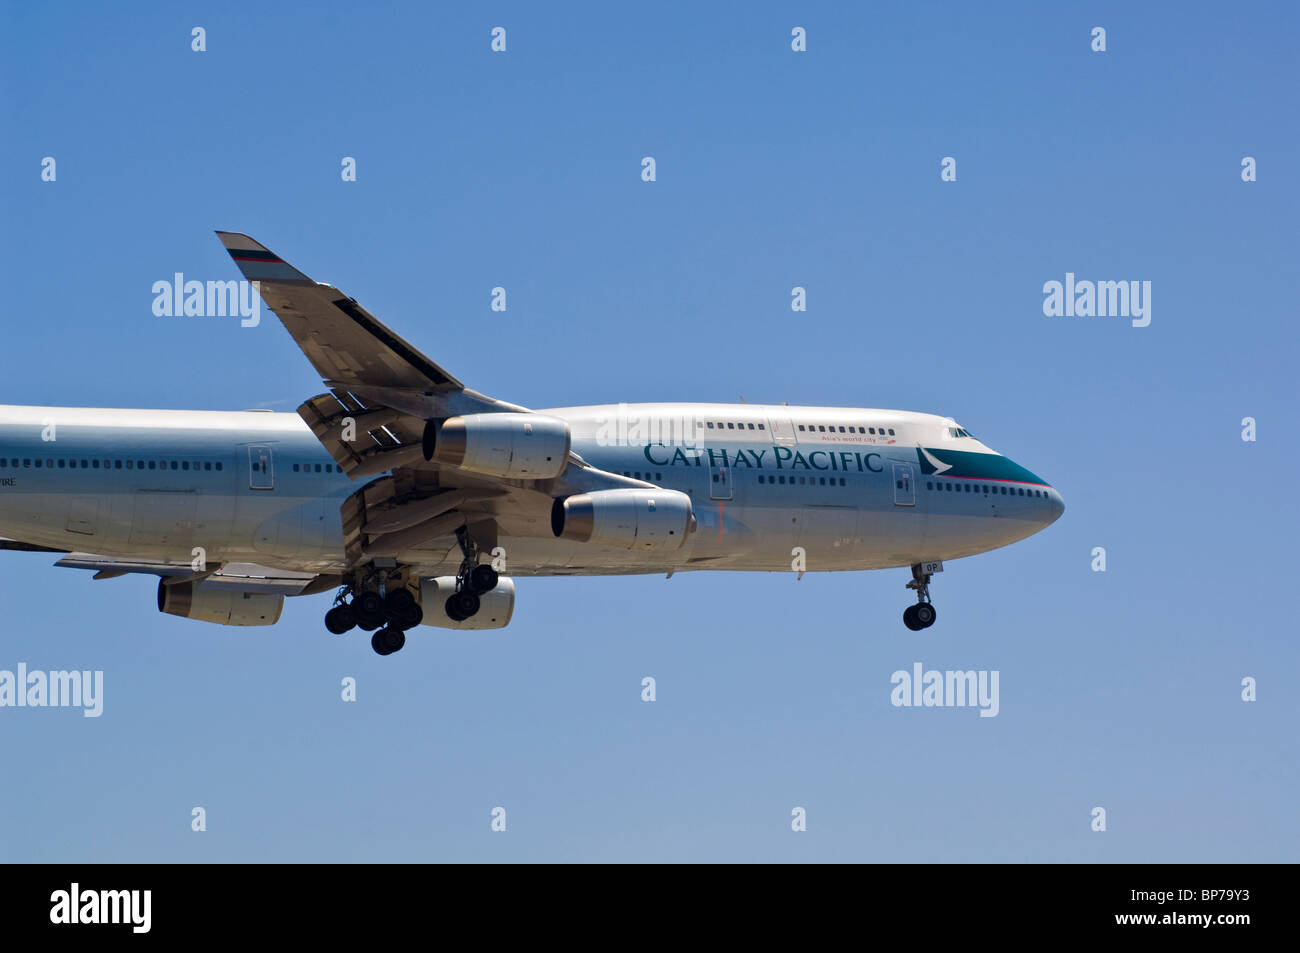 Cathay Pacific Boeing 747-400 in atterraggio a Los Angeles Int'l Airport, Los Angeles, California Foto Stock